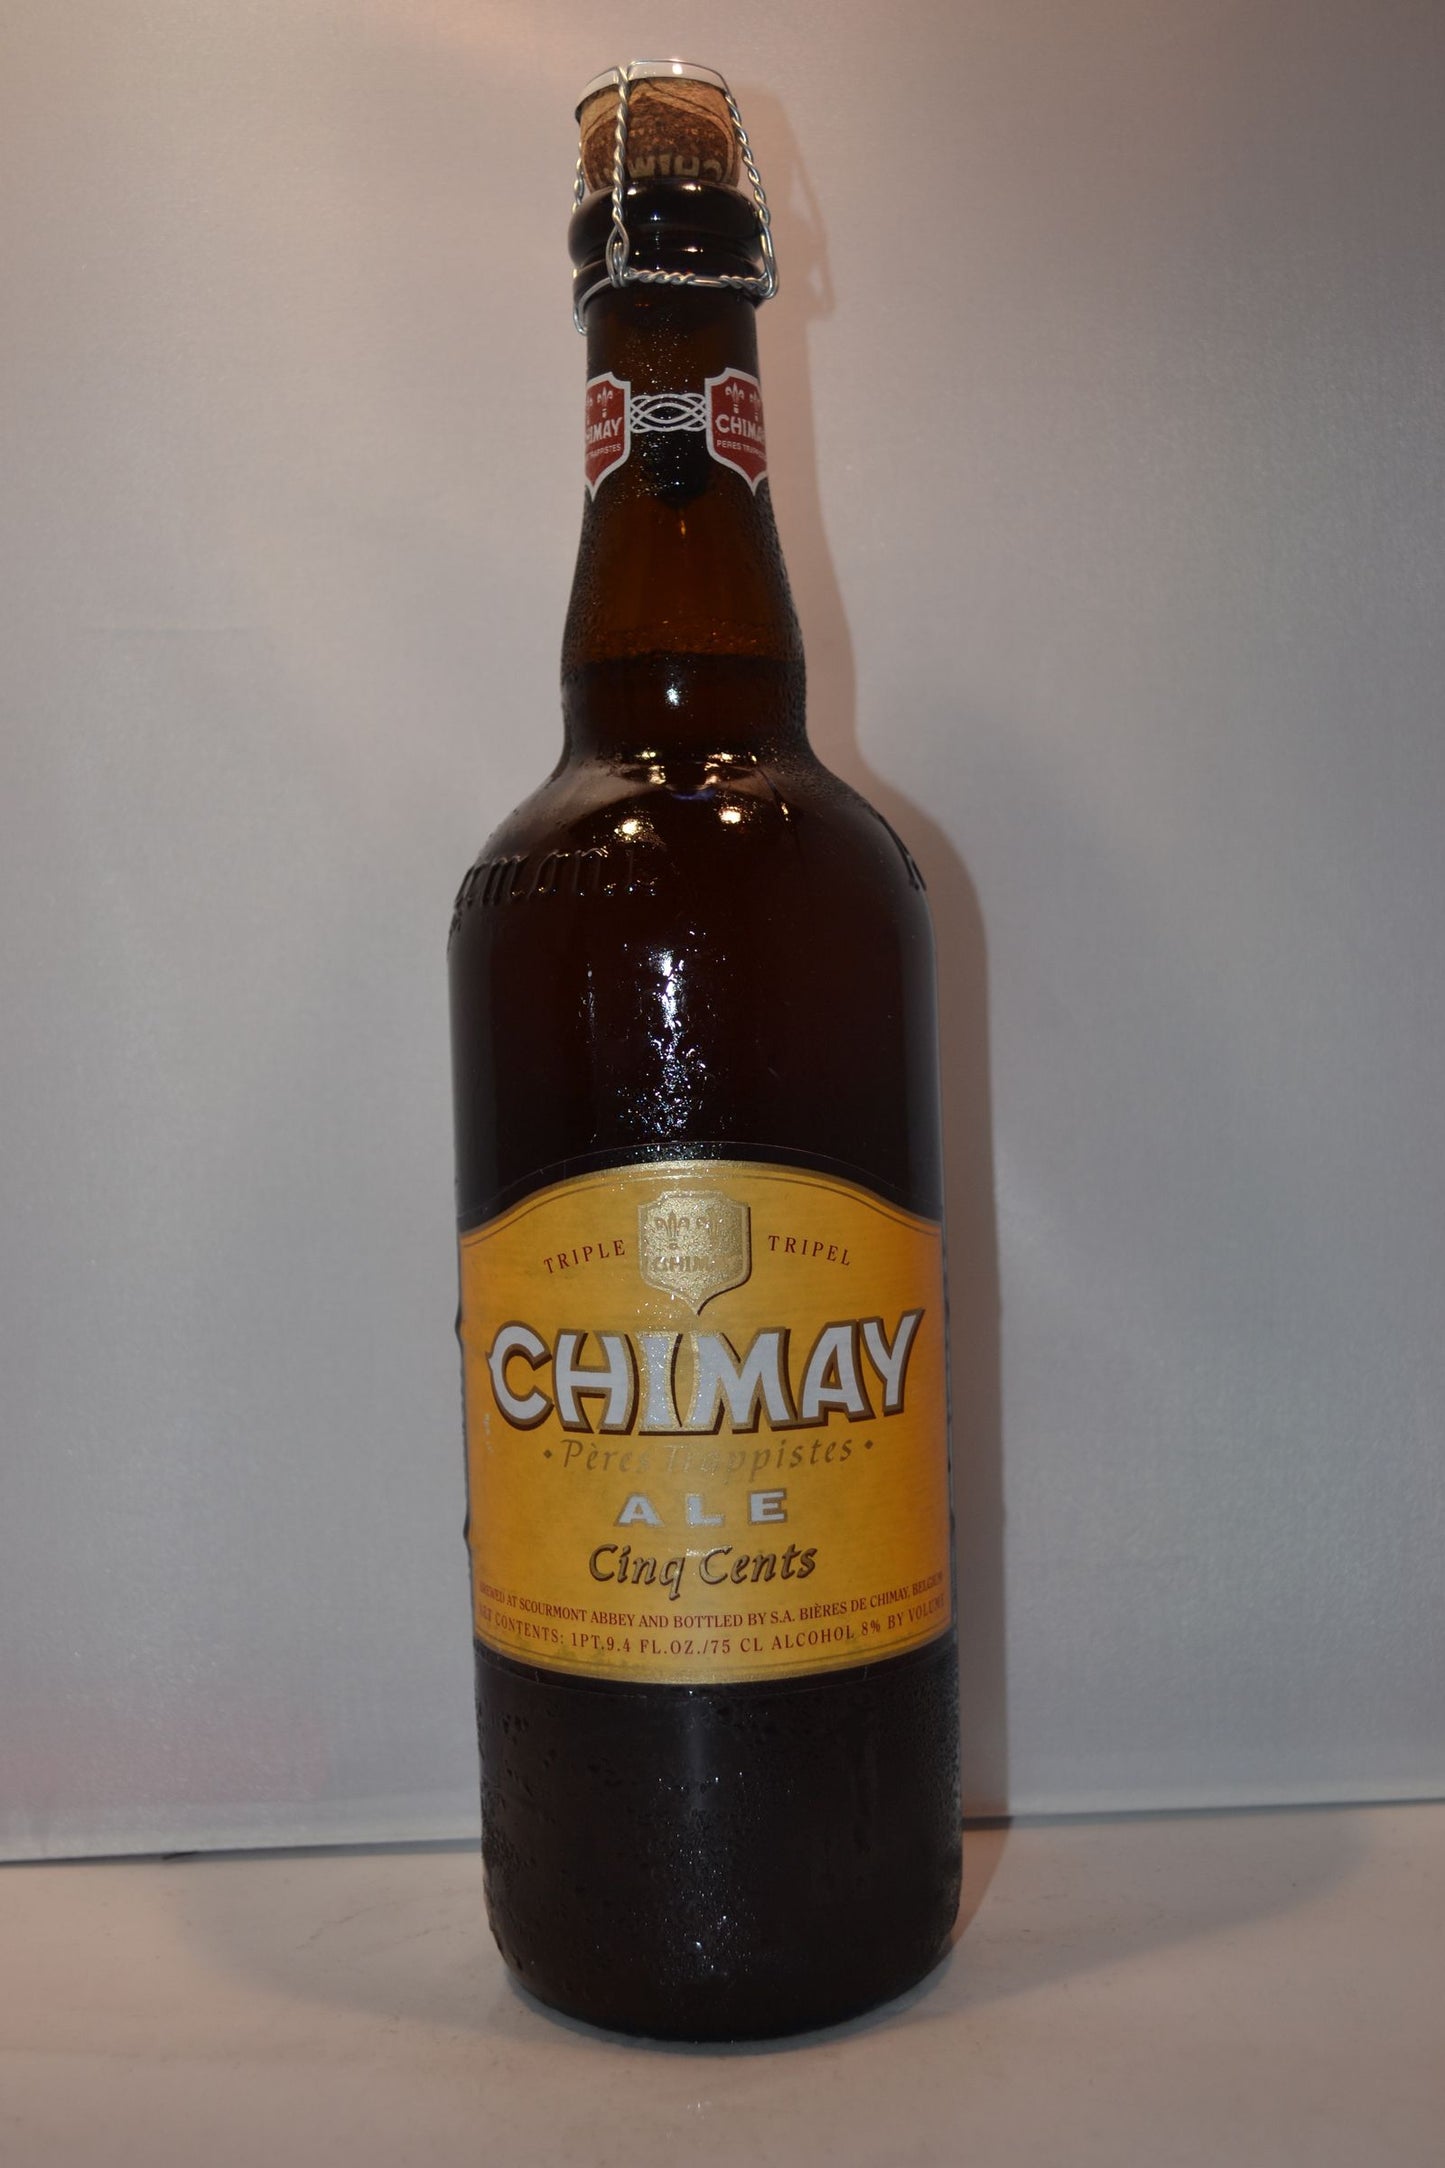 CHIMAY ALE CLNQ CENTS ALE 750ML